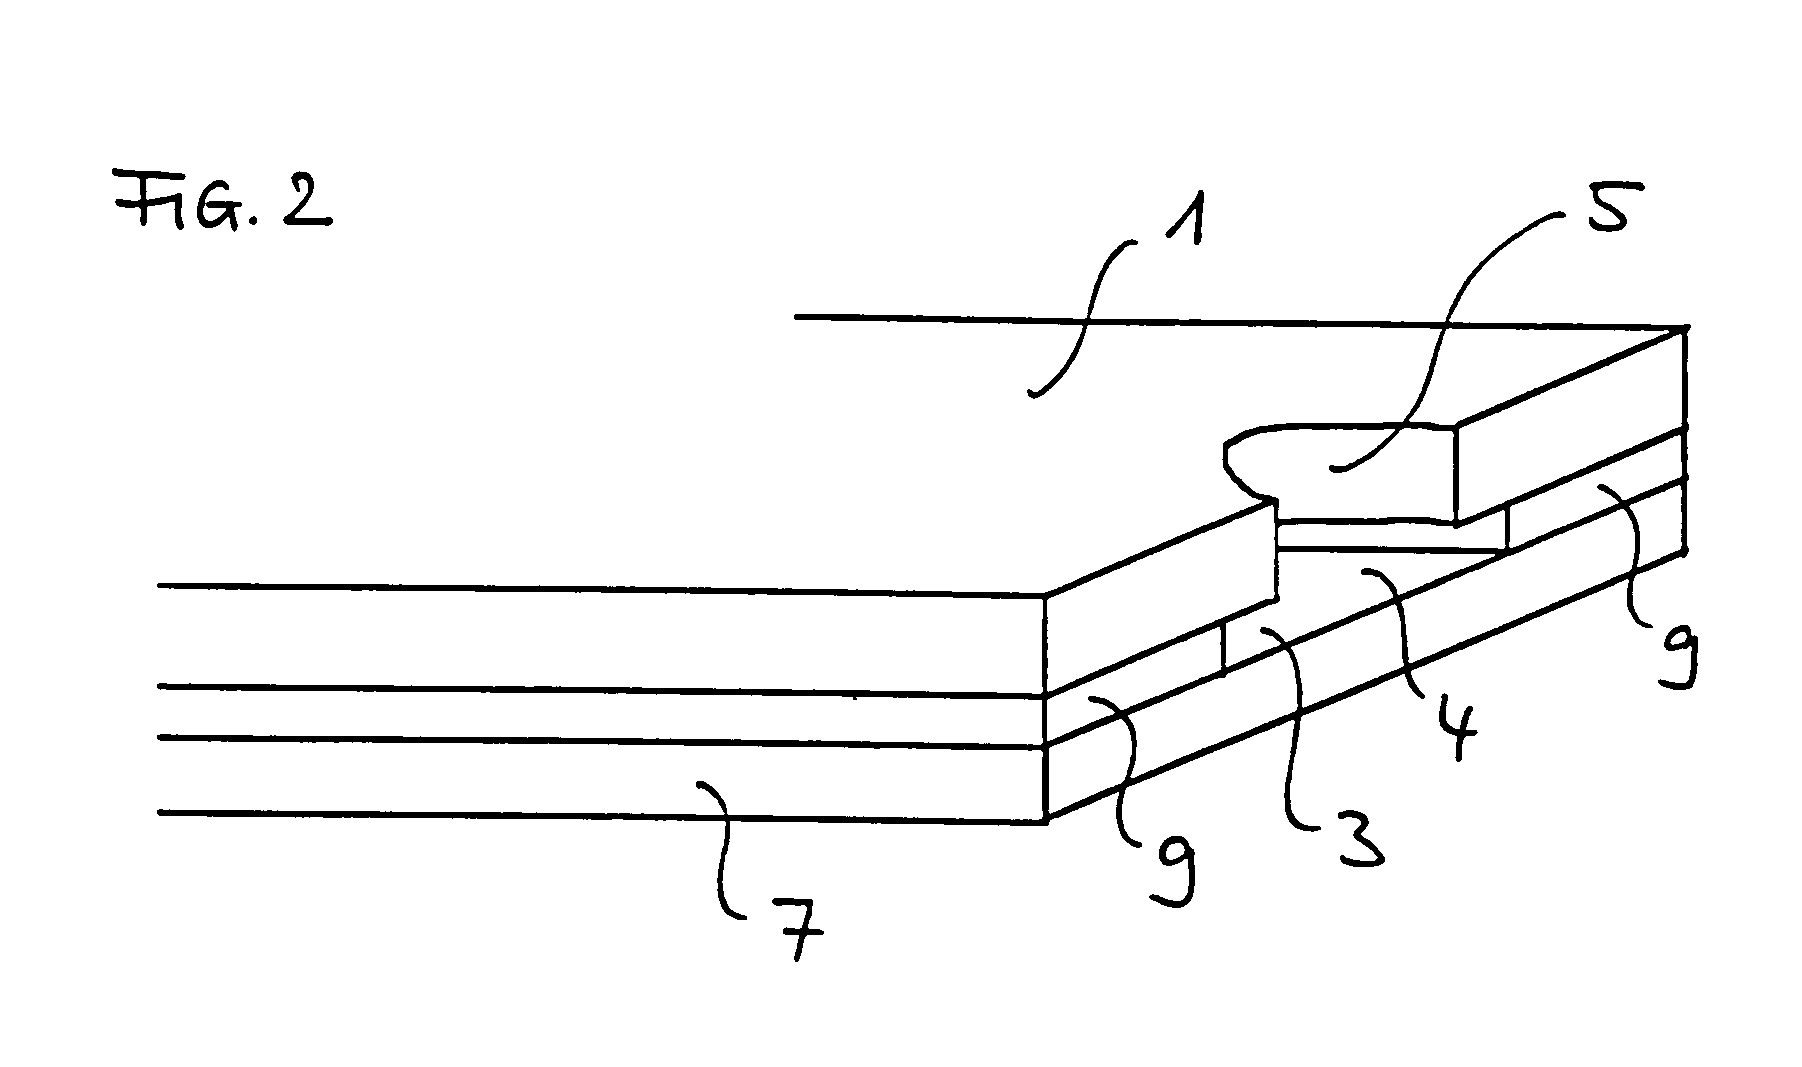 Capillary active test element having an intermediate layer situated between the support and the covering